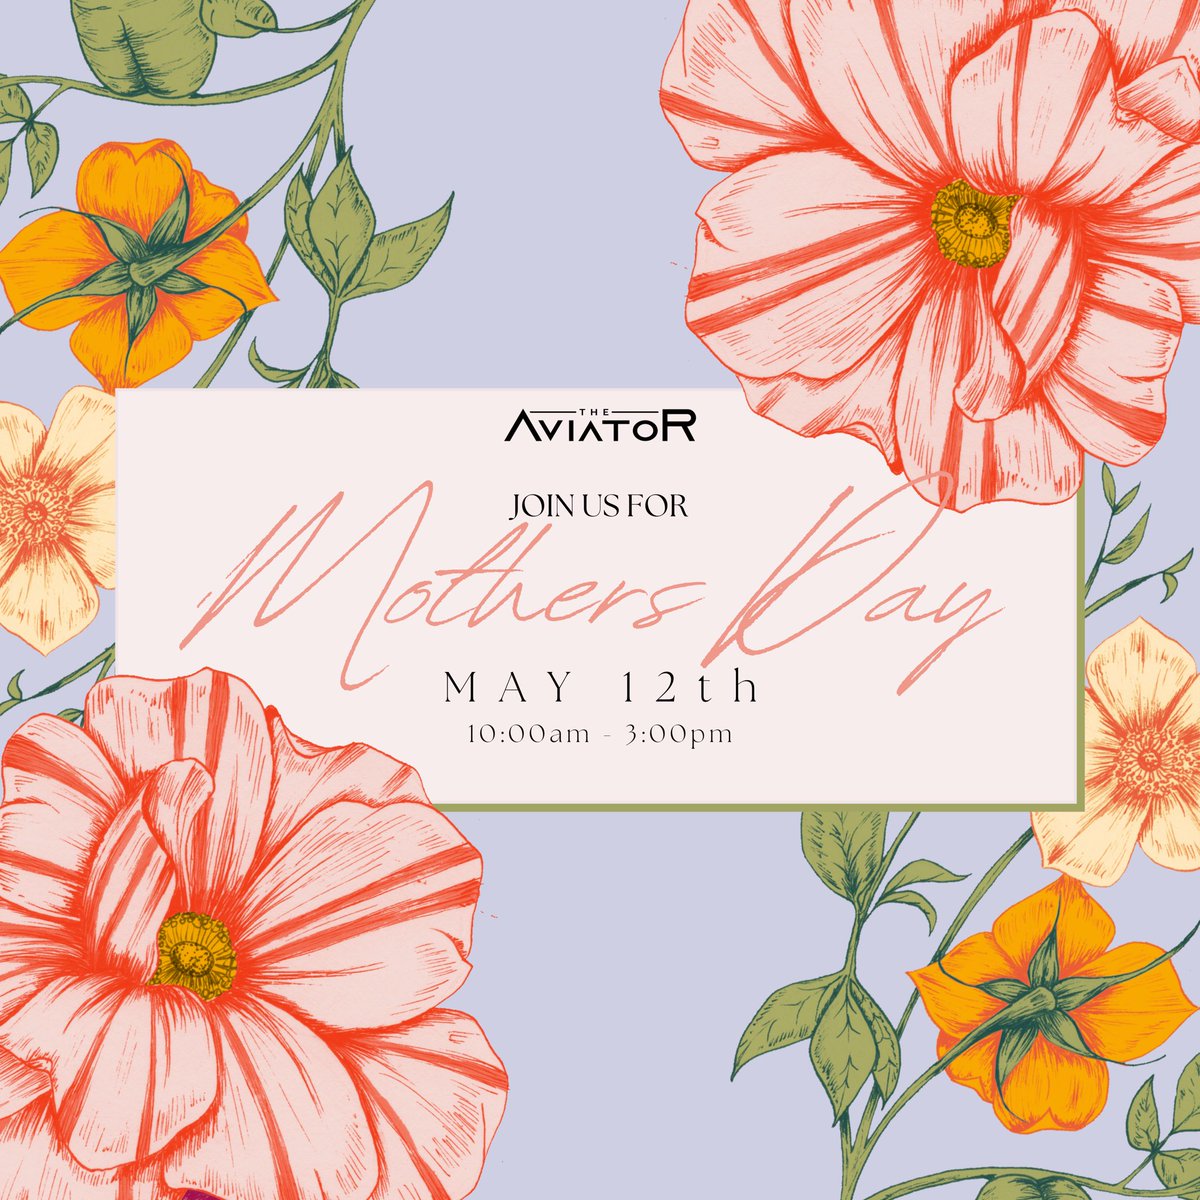 JOIN US for a Mother’s Day Brunch Buffet on Sunday, May 12th 10AM - 3PM! 🌼🌸🌻 Limited seats available. Adult Ticket: $65 Kids 12 & Under Ticket: $25 Kids 3 & Under: Free! For Tickets, and to see the full menu, please visit: exploretock.com/aviatorclevela…